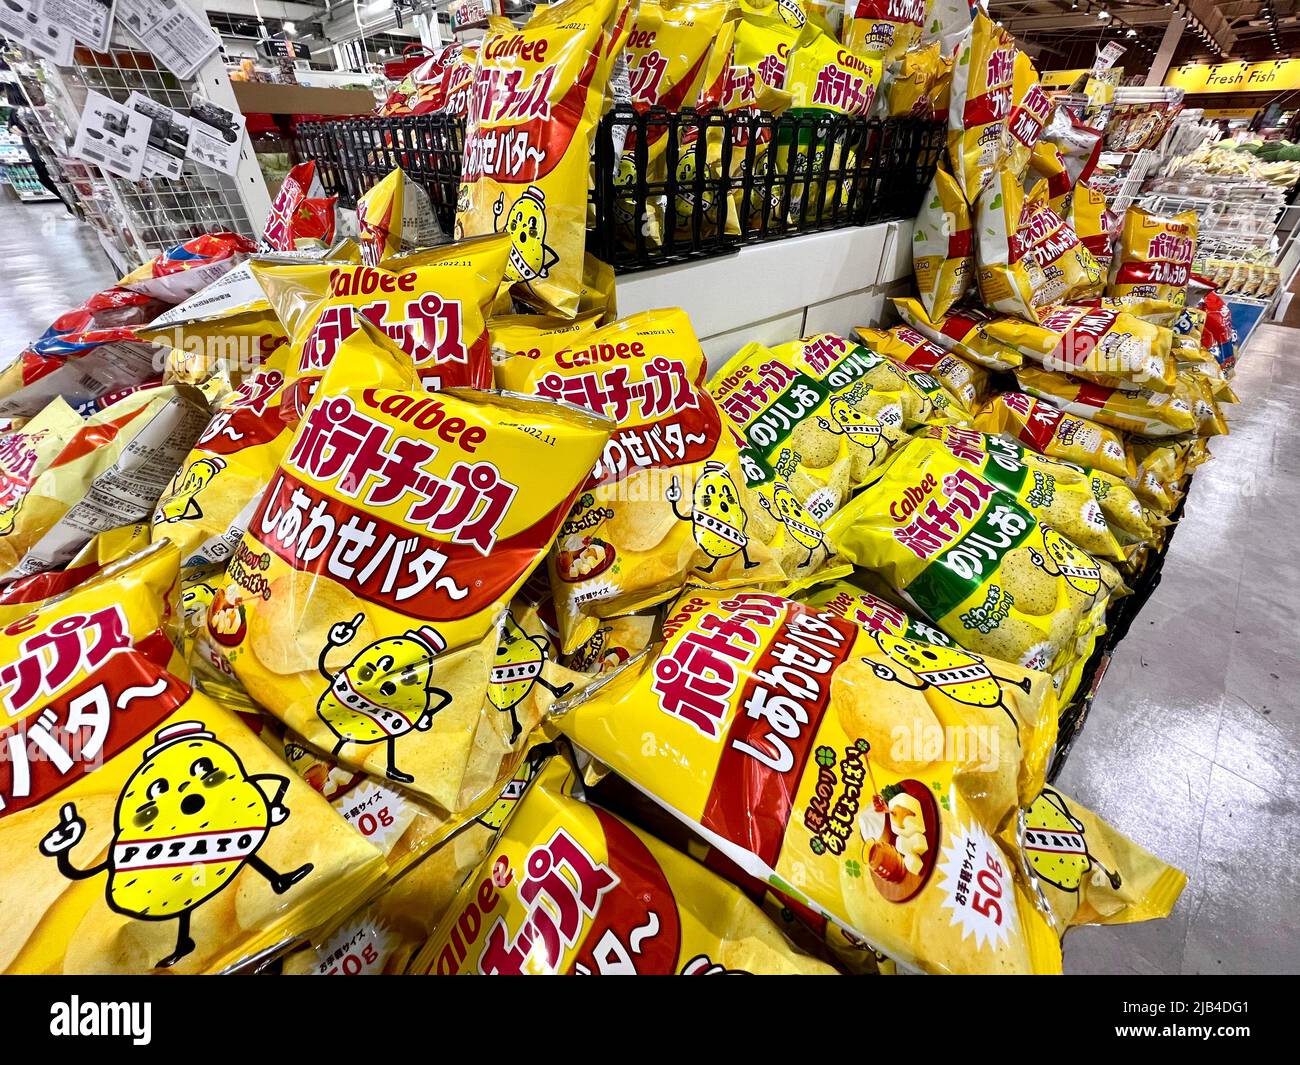 Calbee potato chips snack on display at Trial Supermarket in Fukuoka, Japan. Calbee is one of Japan's biggest snack makers. Stock Photo